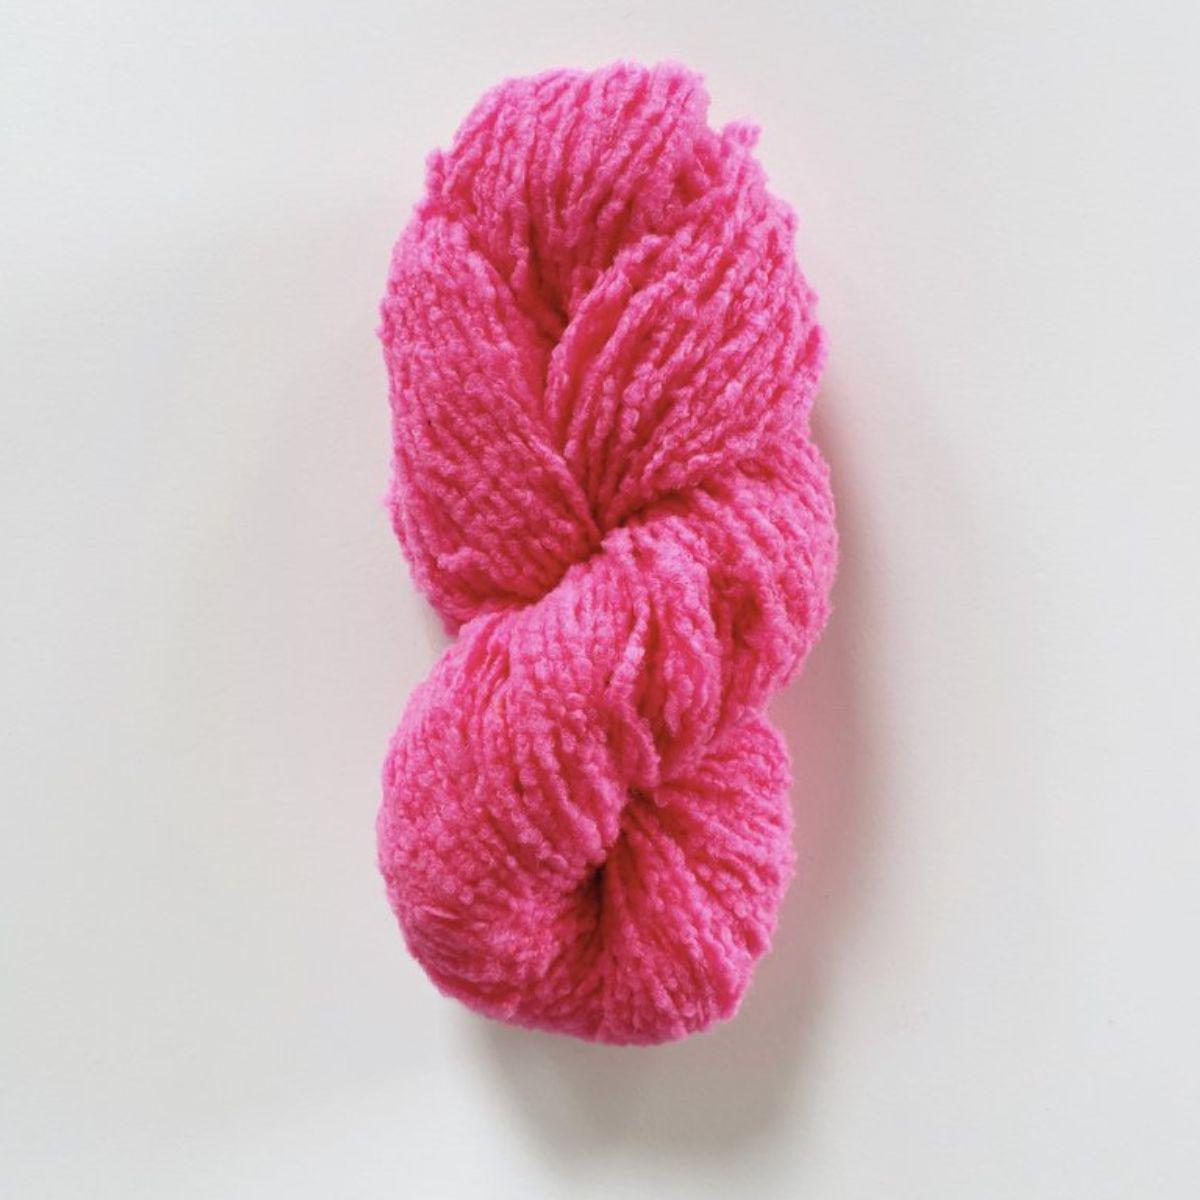 Knit Collage-Serenity Boucle Yarn-yarn-Coral Cabana-gather here online